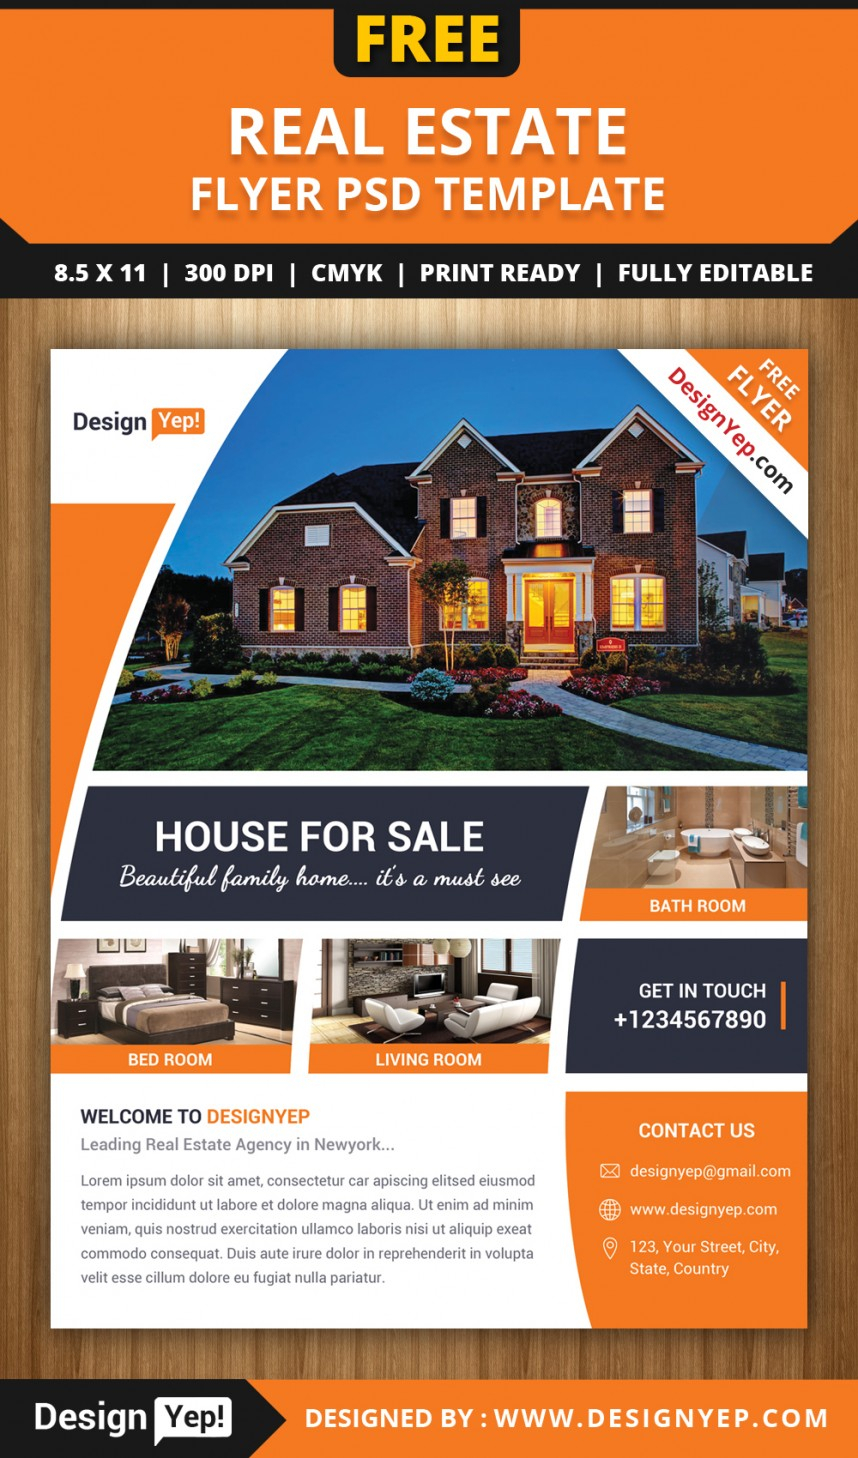 Awesome Free Real Estate Flyer Templates Template Ideas Psd With Regard To Real Estate Brochure Templates Psd Free Download